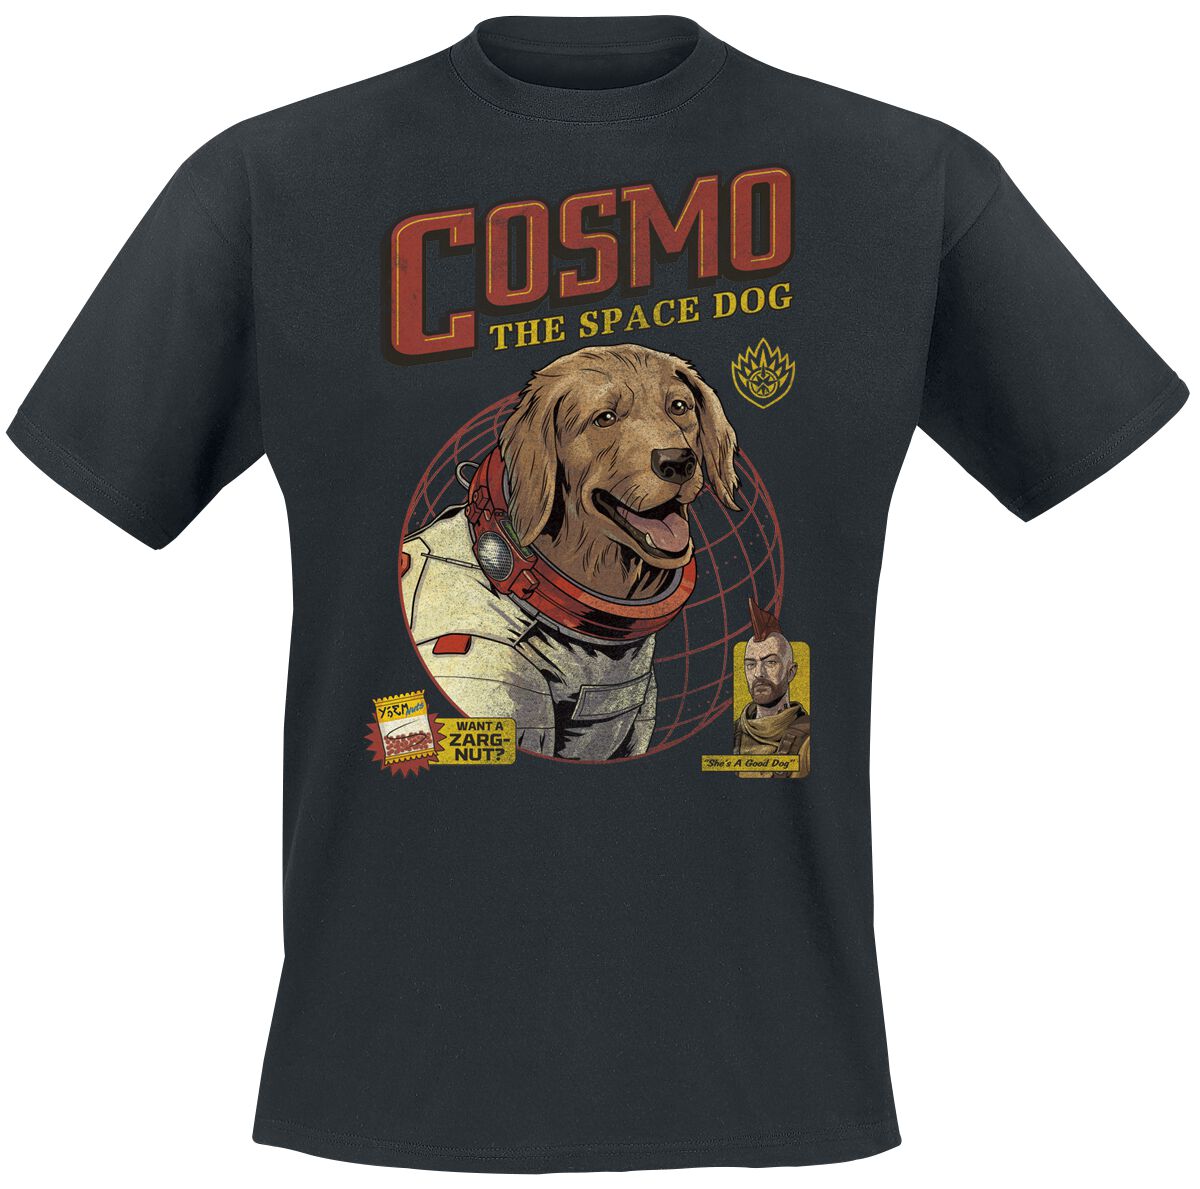 Guardians Of The Galaxy Vol. 3 - Cosmo -The Space Dog T-Shirt schwarz in L